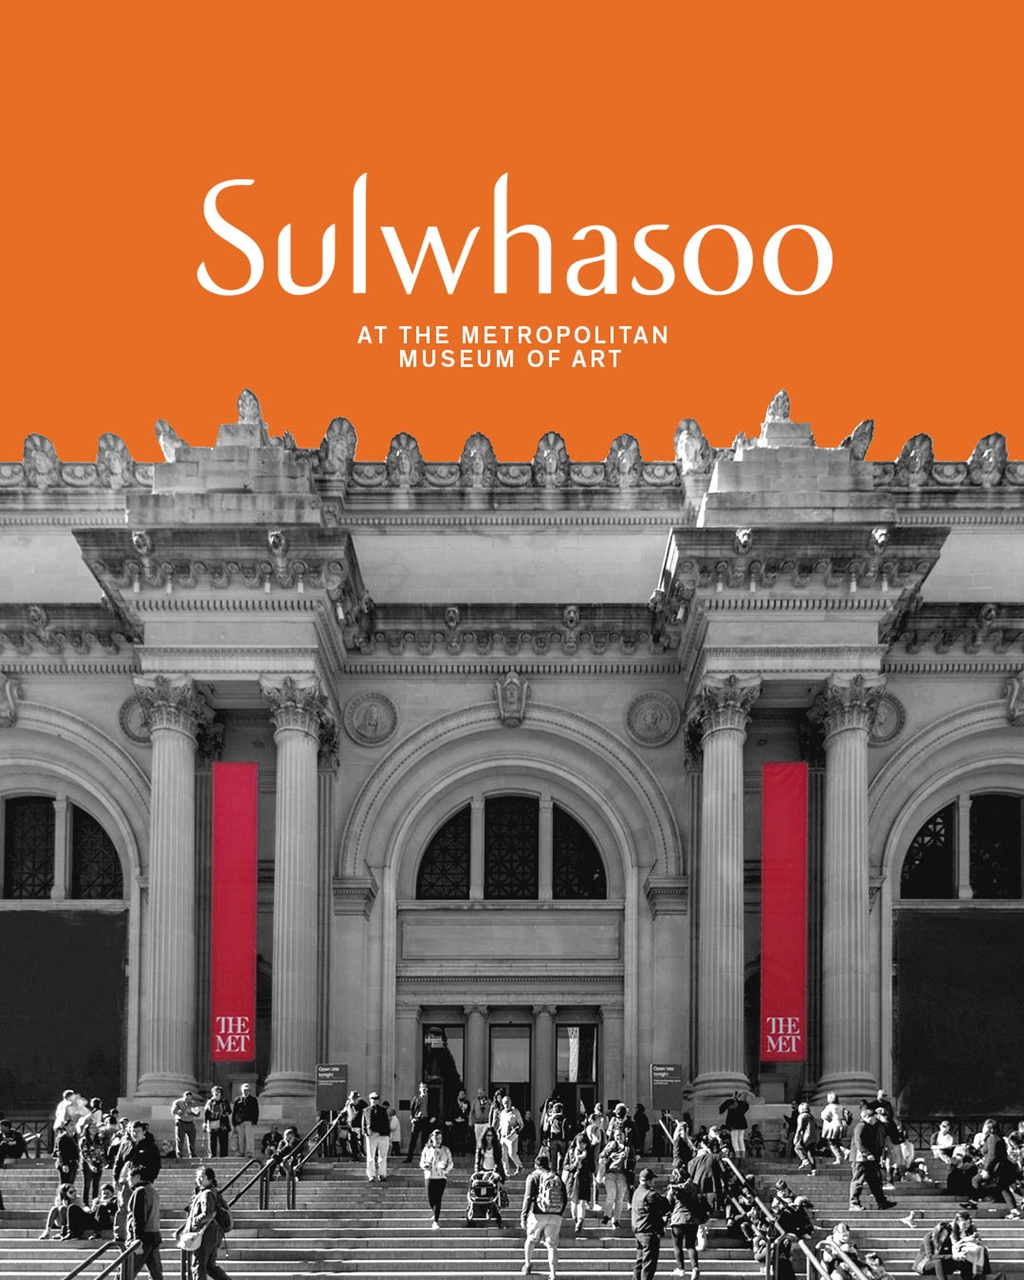 A promotional image for Sulwhasoo's partnership with the Metropolitan Museum of Art in New York (Amorepacific)